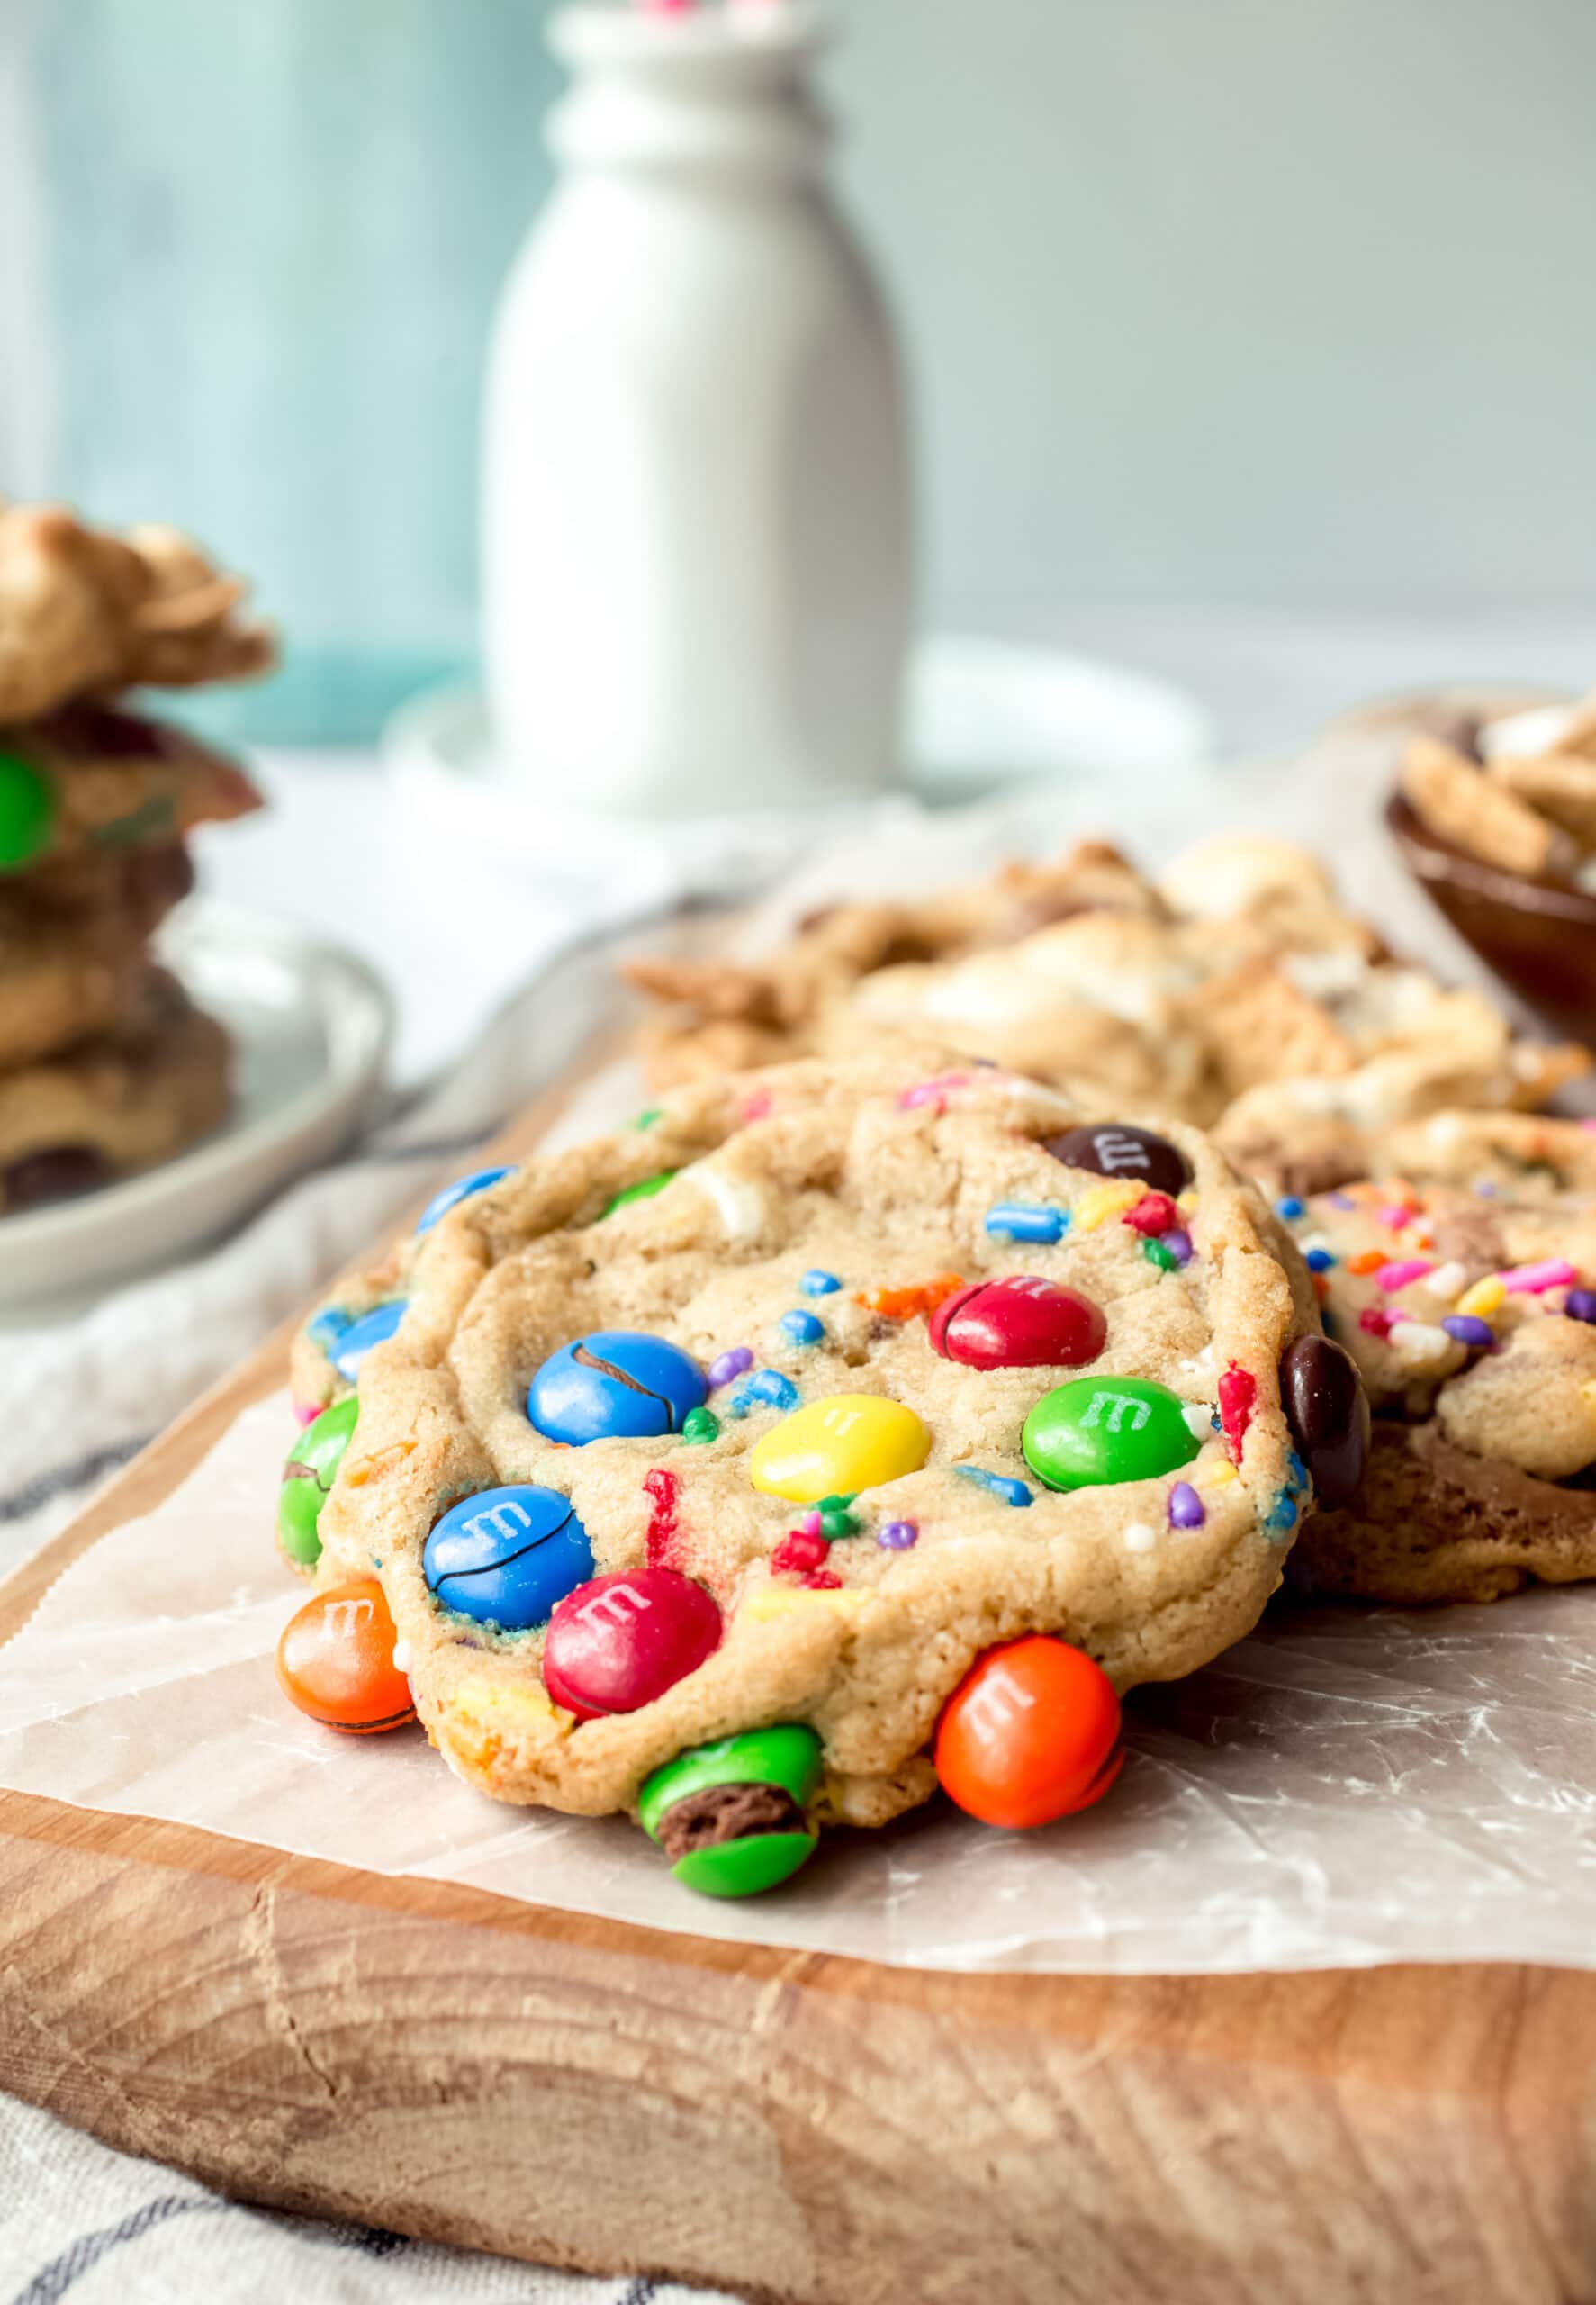 Basic Cookie Dough baked with M&Ms added in